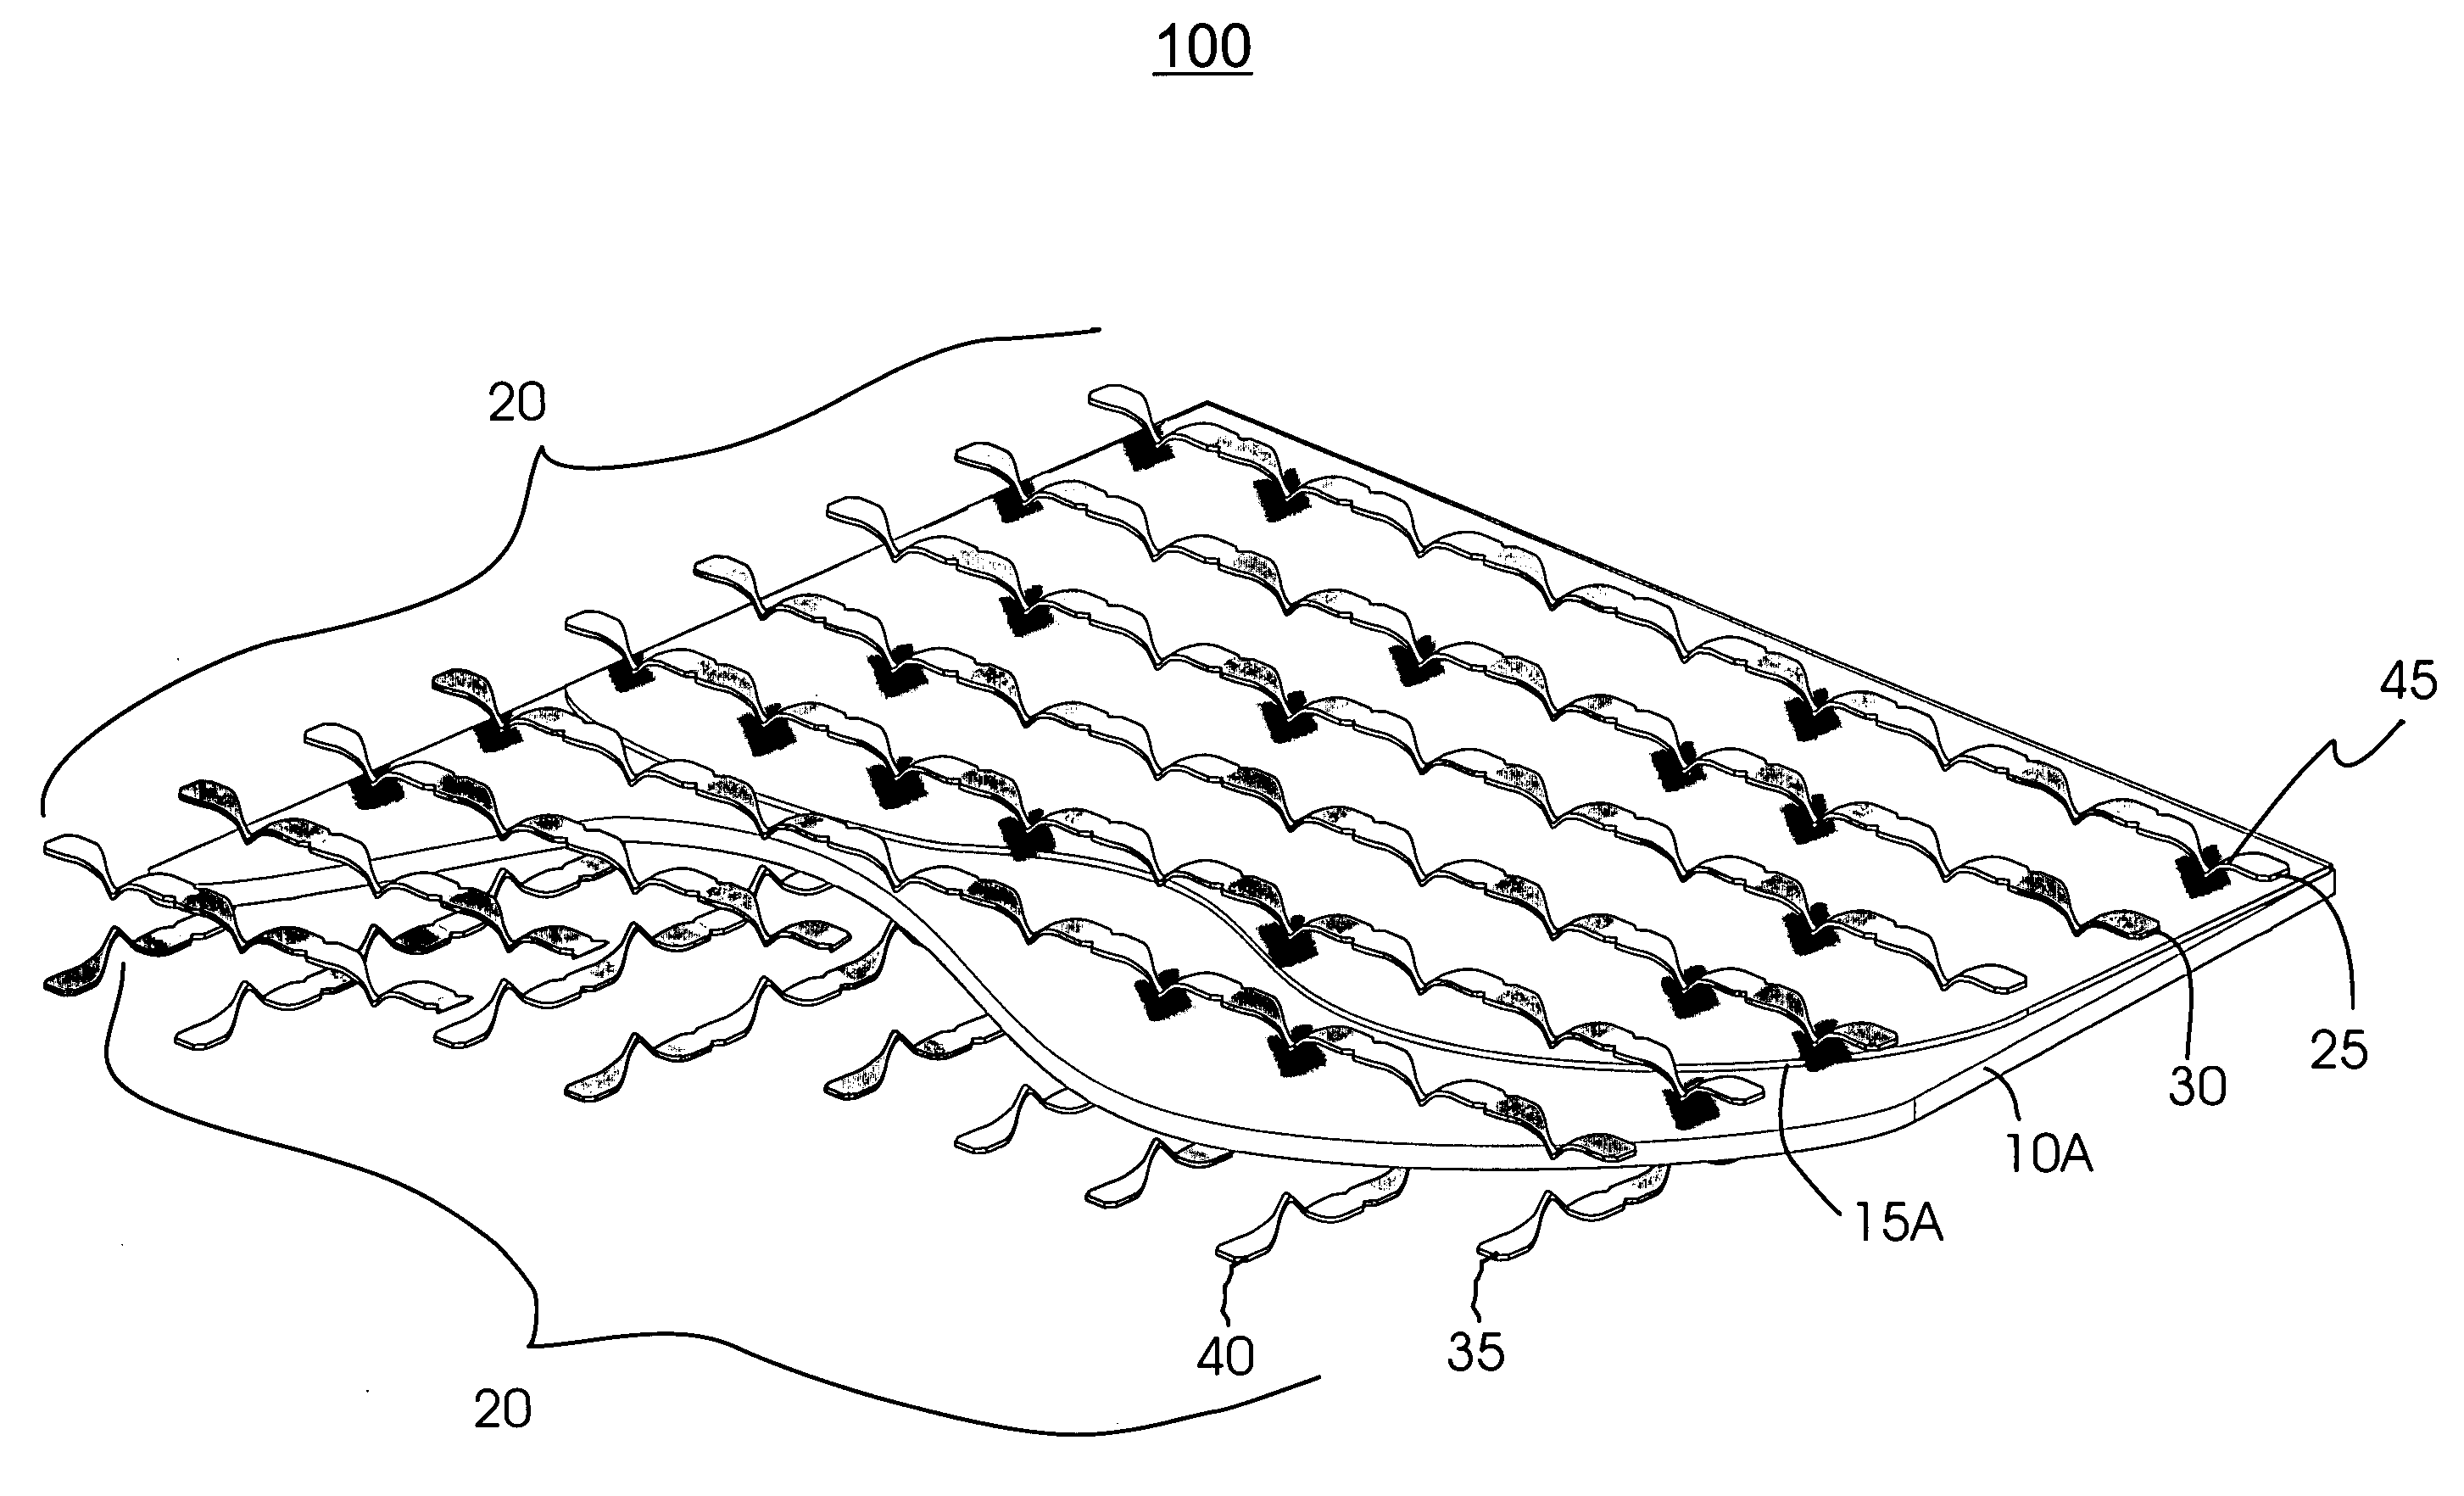 System and method for storing data in an unpatterned, continuous magnetic layer